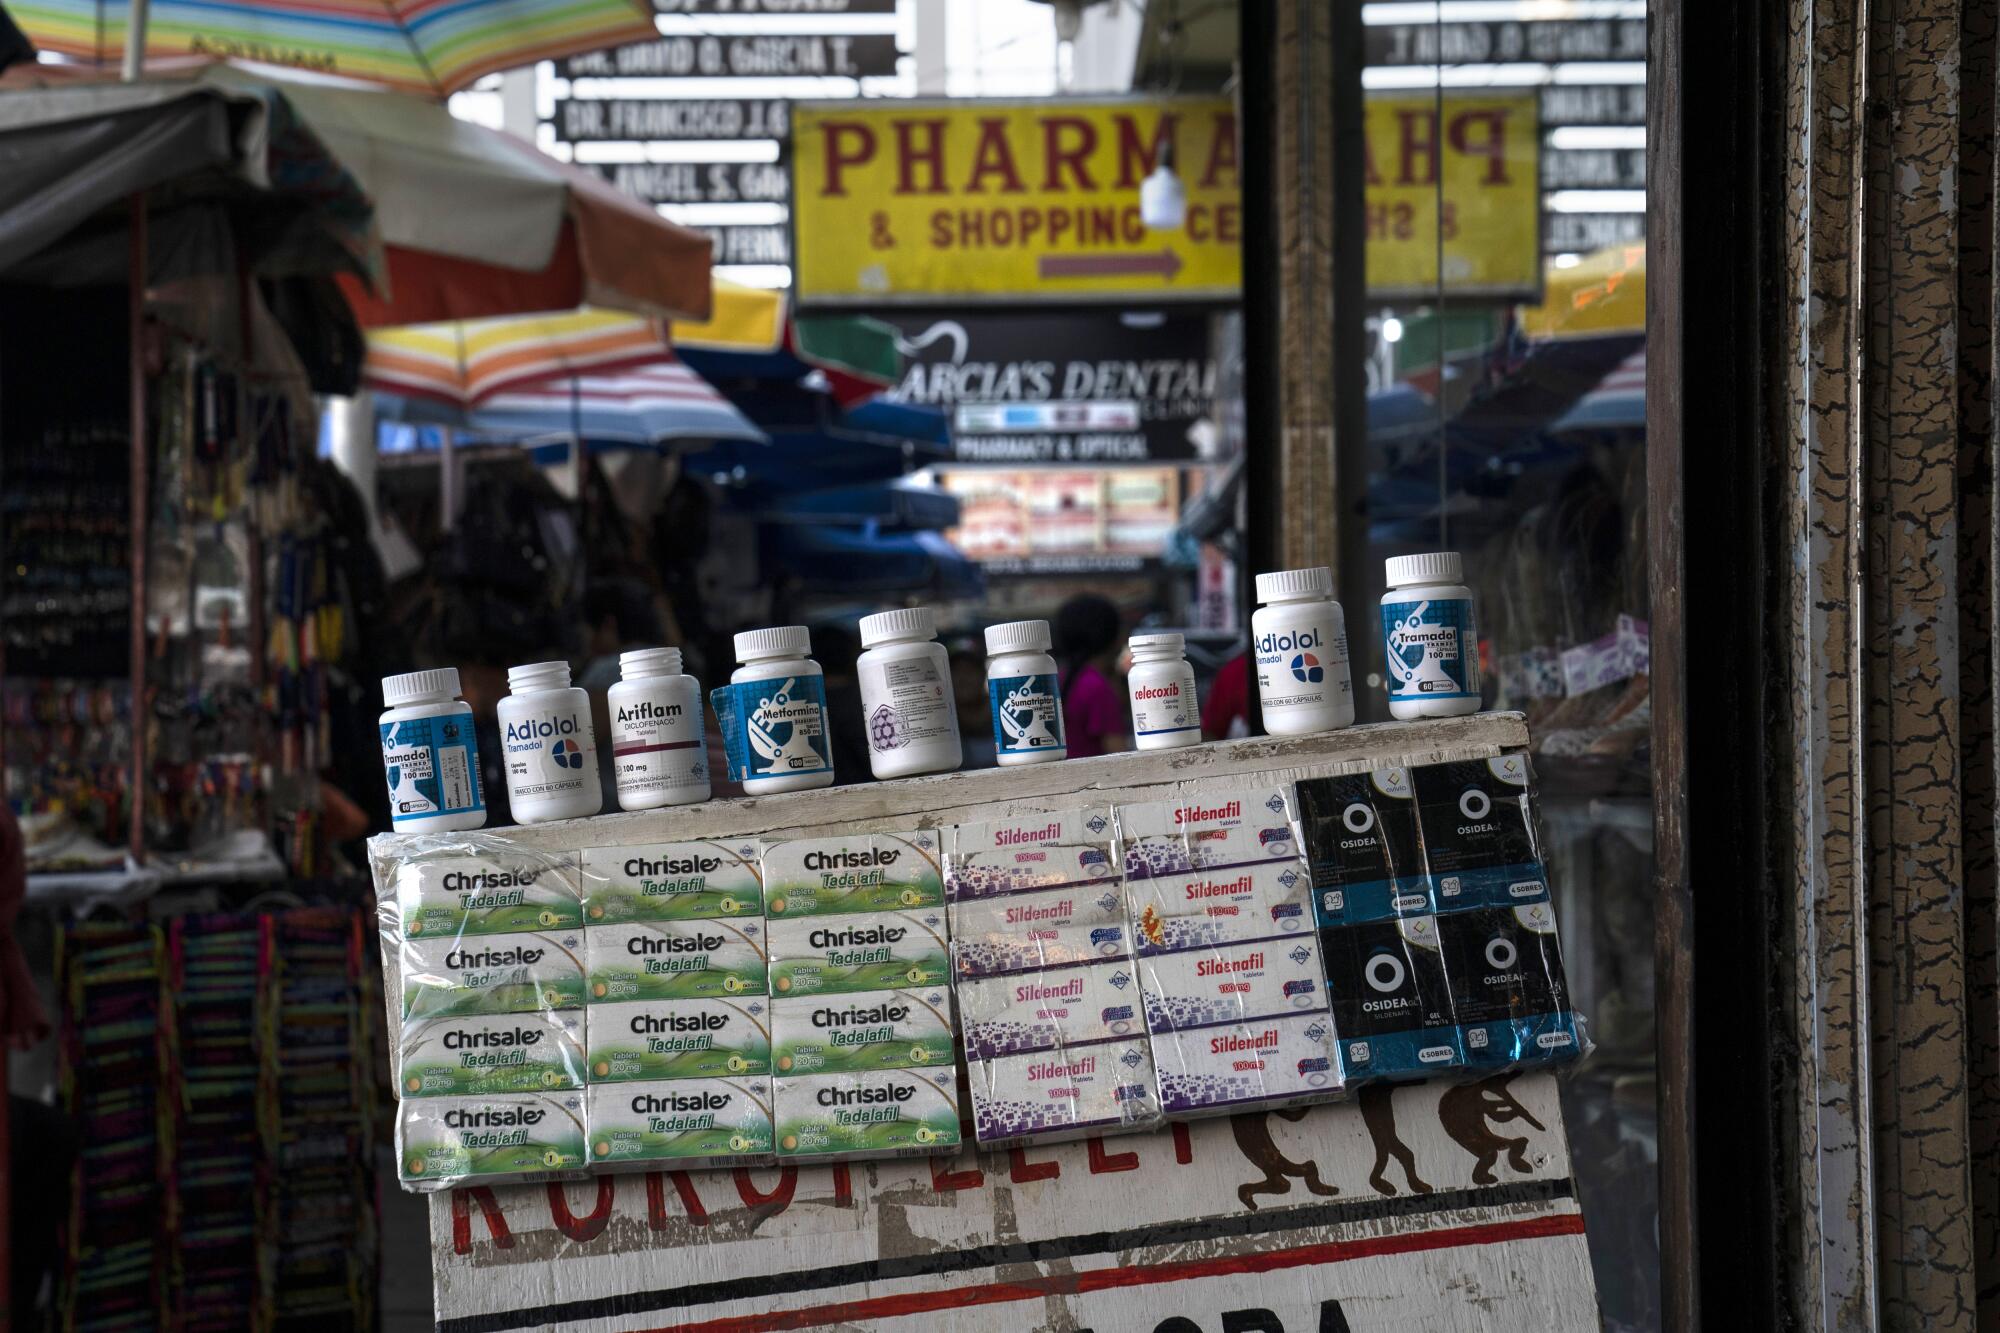 Empty medication bottles and containers are displayed outside a business in Nuevo Progreso.